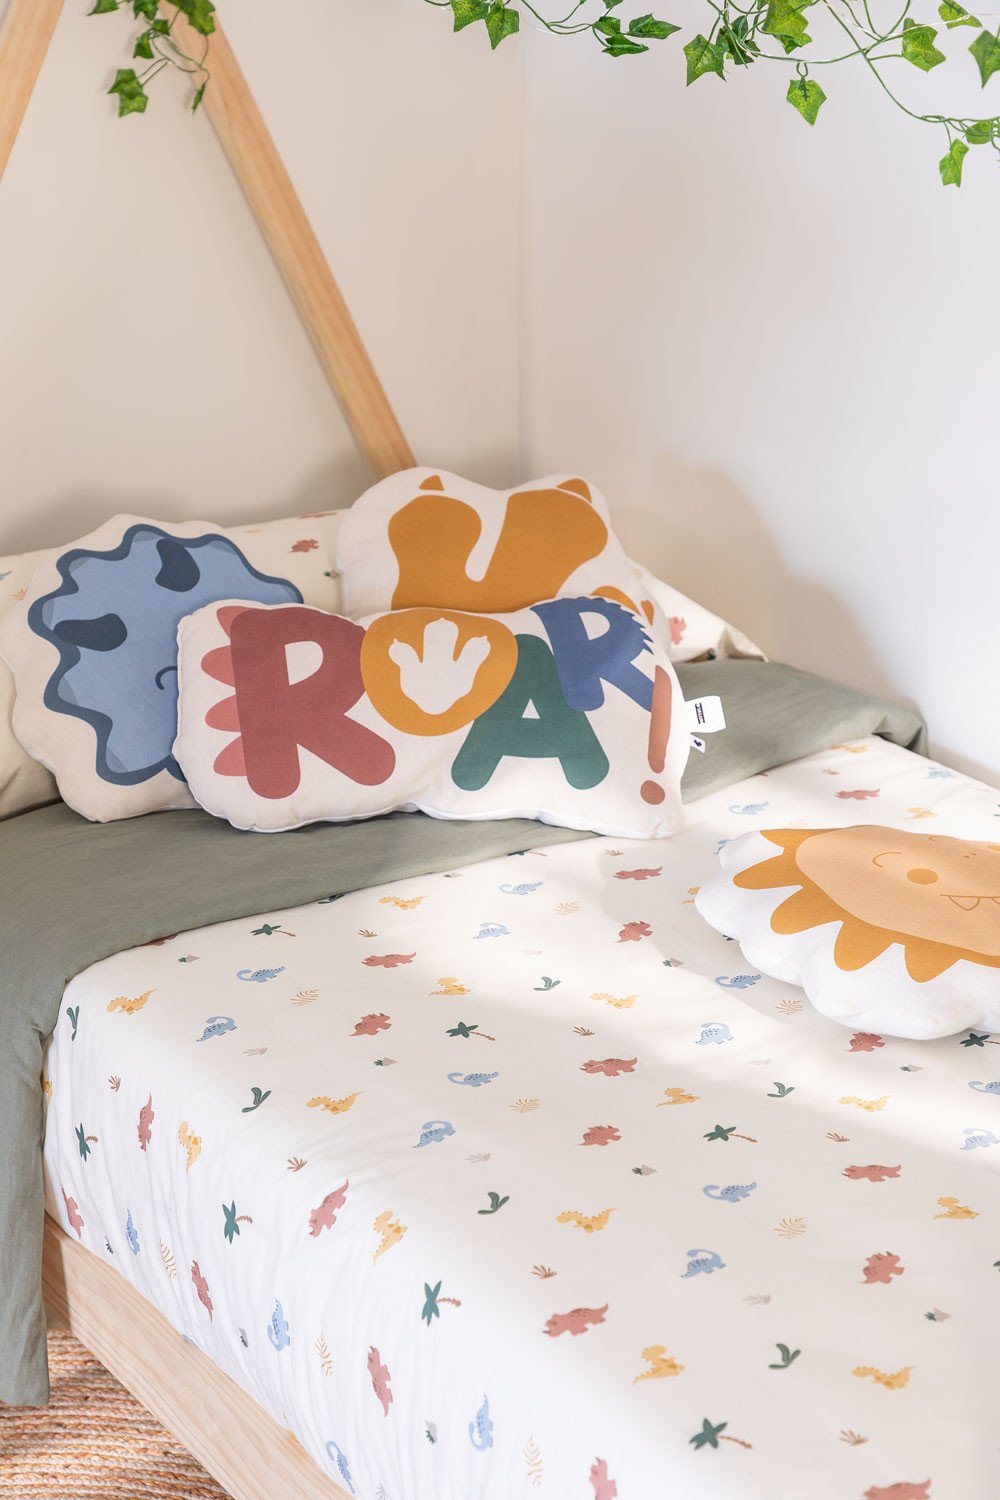 Cotton Duvet Cover 90 Cm Bed Dino Party, Funny Duvet Covers Uk